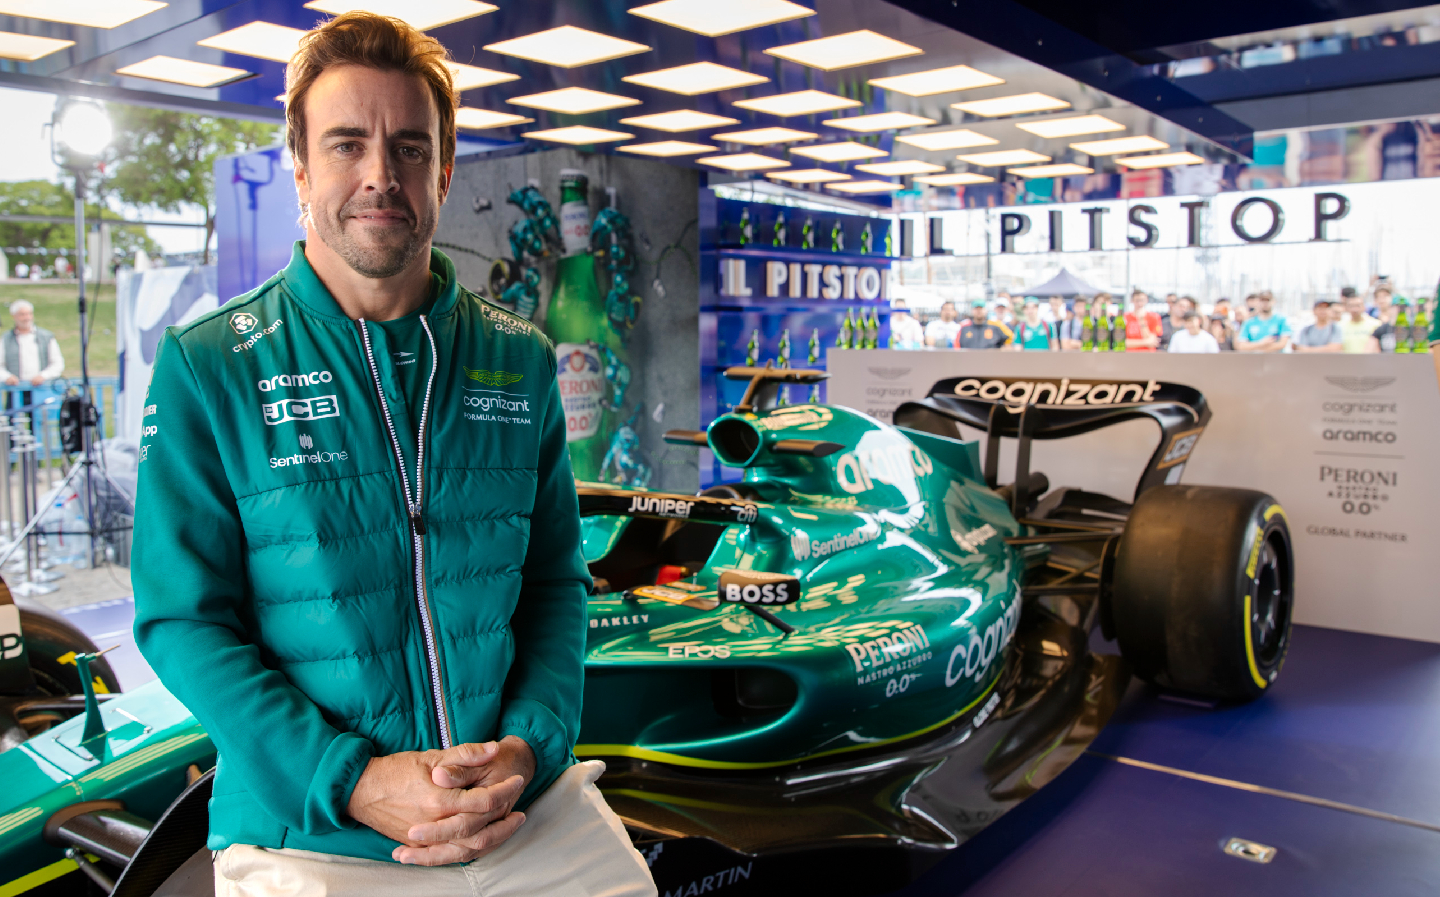 The Fernando Alonso Aston Martin match-up is exactly what Formula 1 needs